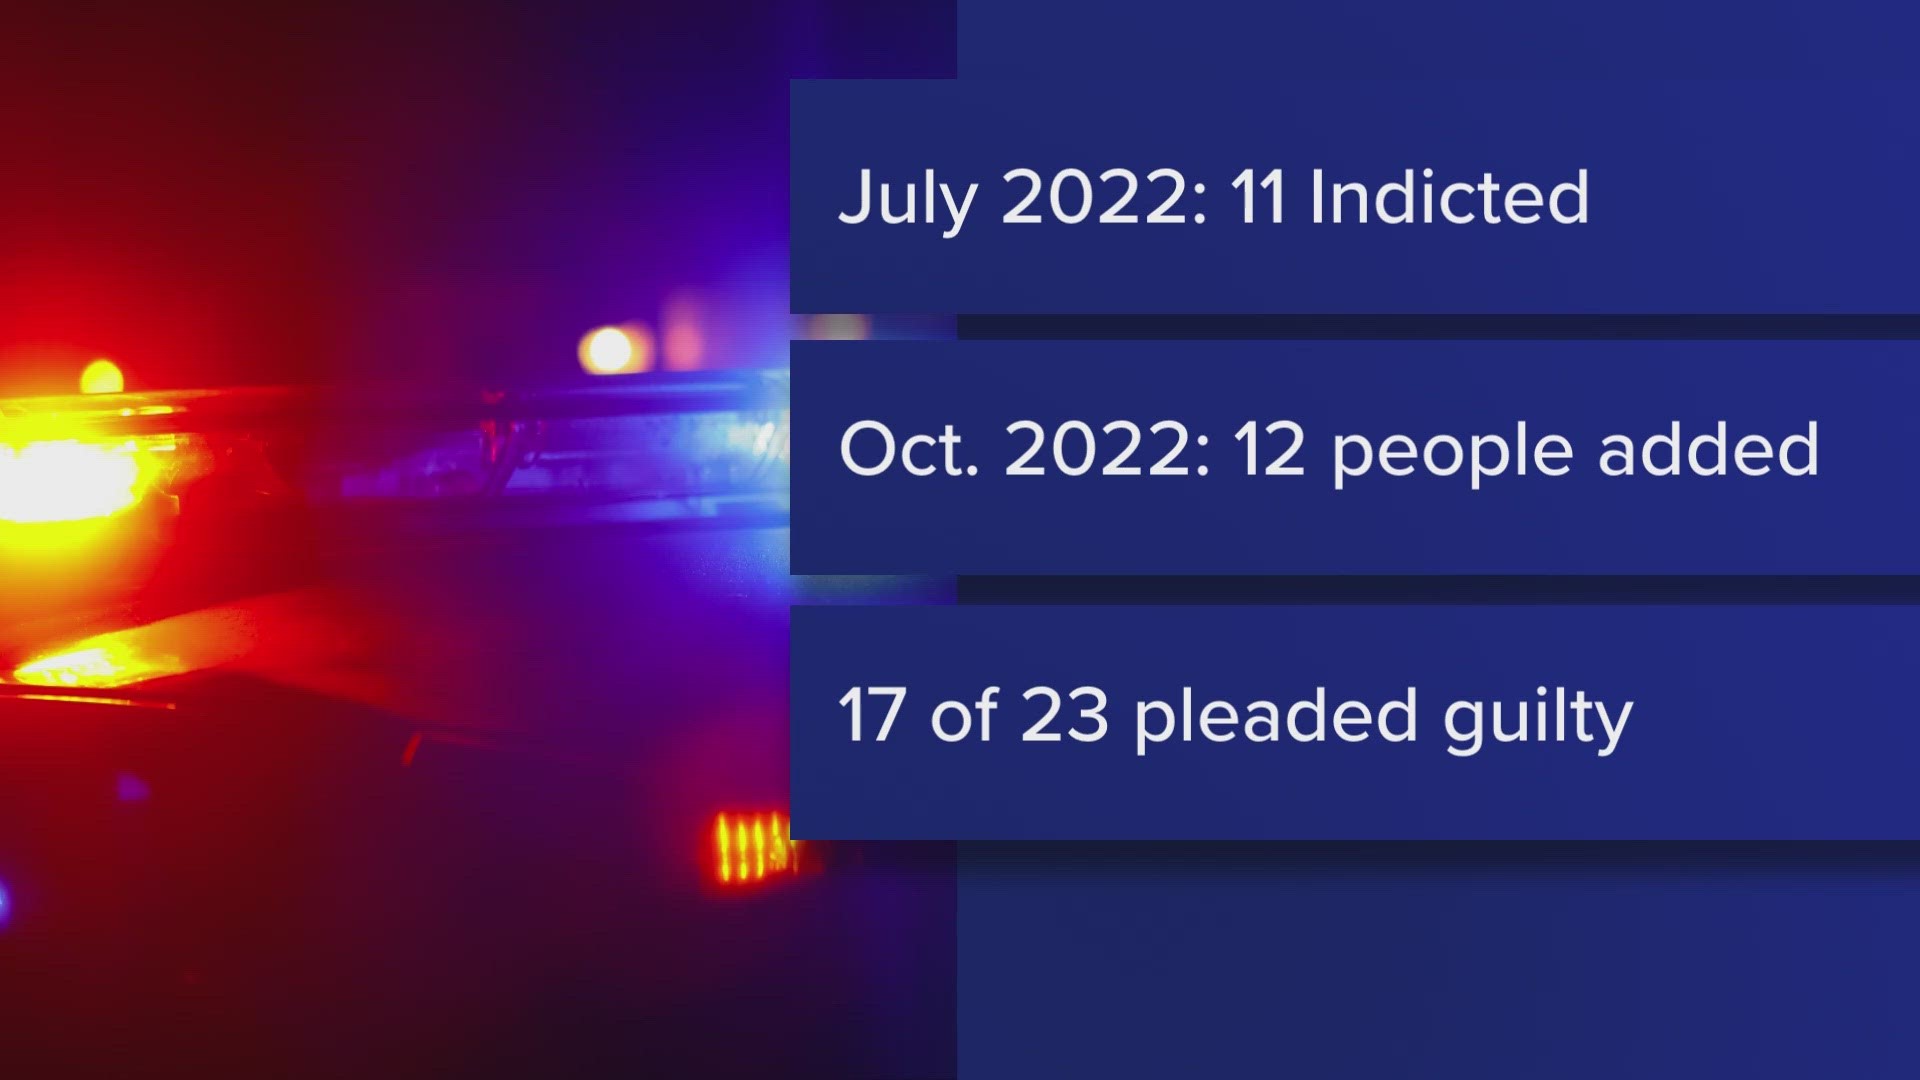 In October 2022, 12 more people and 28 new charges were added to the case by the government.